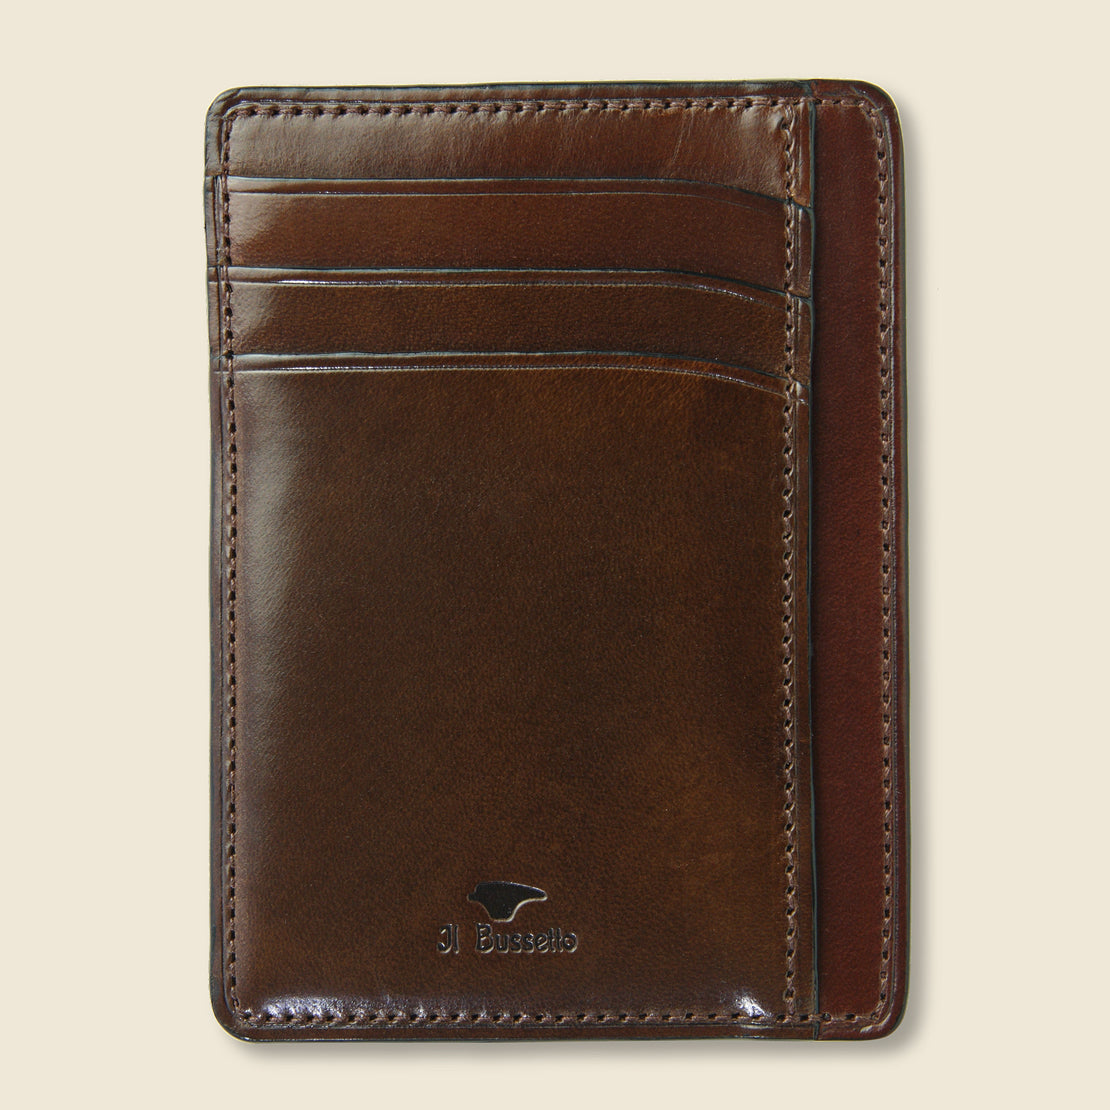 Il Bussetto Card and Document Case - Dark Brown